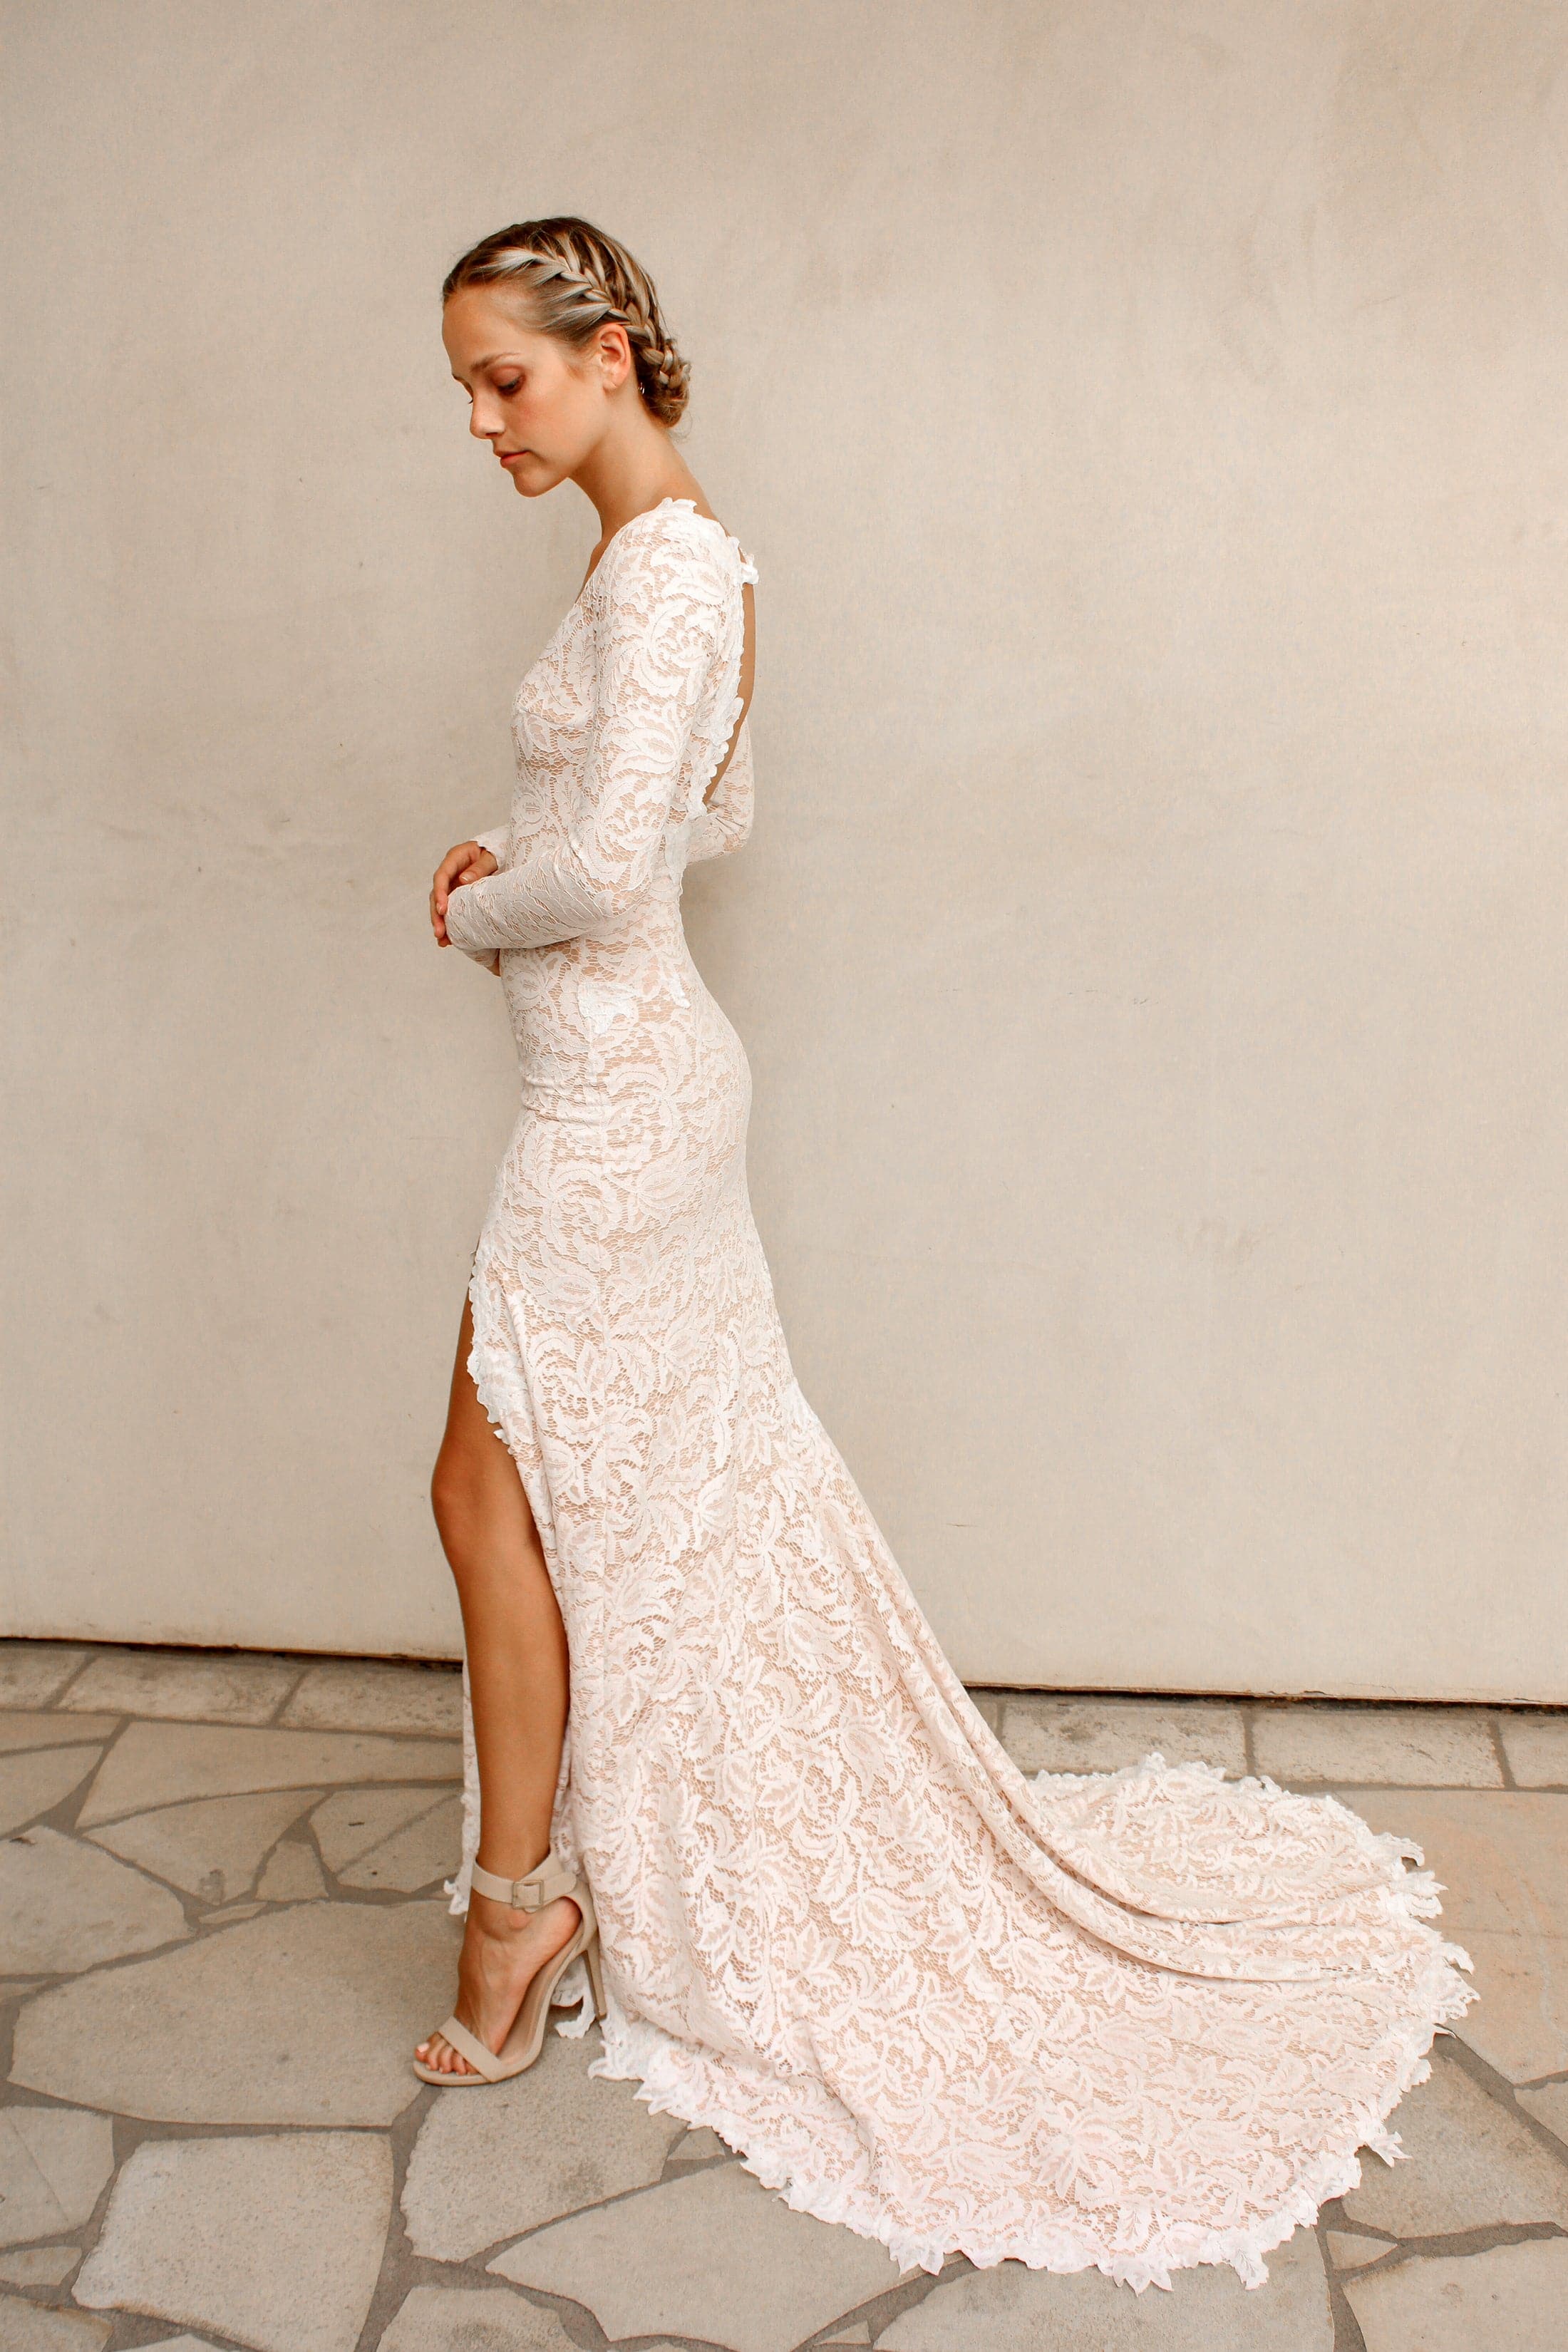 10 STUNNING SLEEVES FOR YOUR WEDDING GOWN